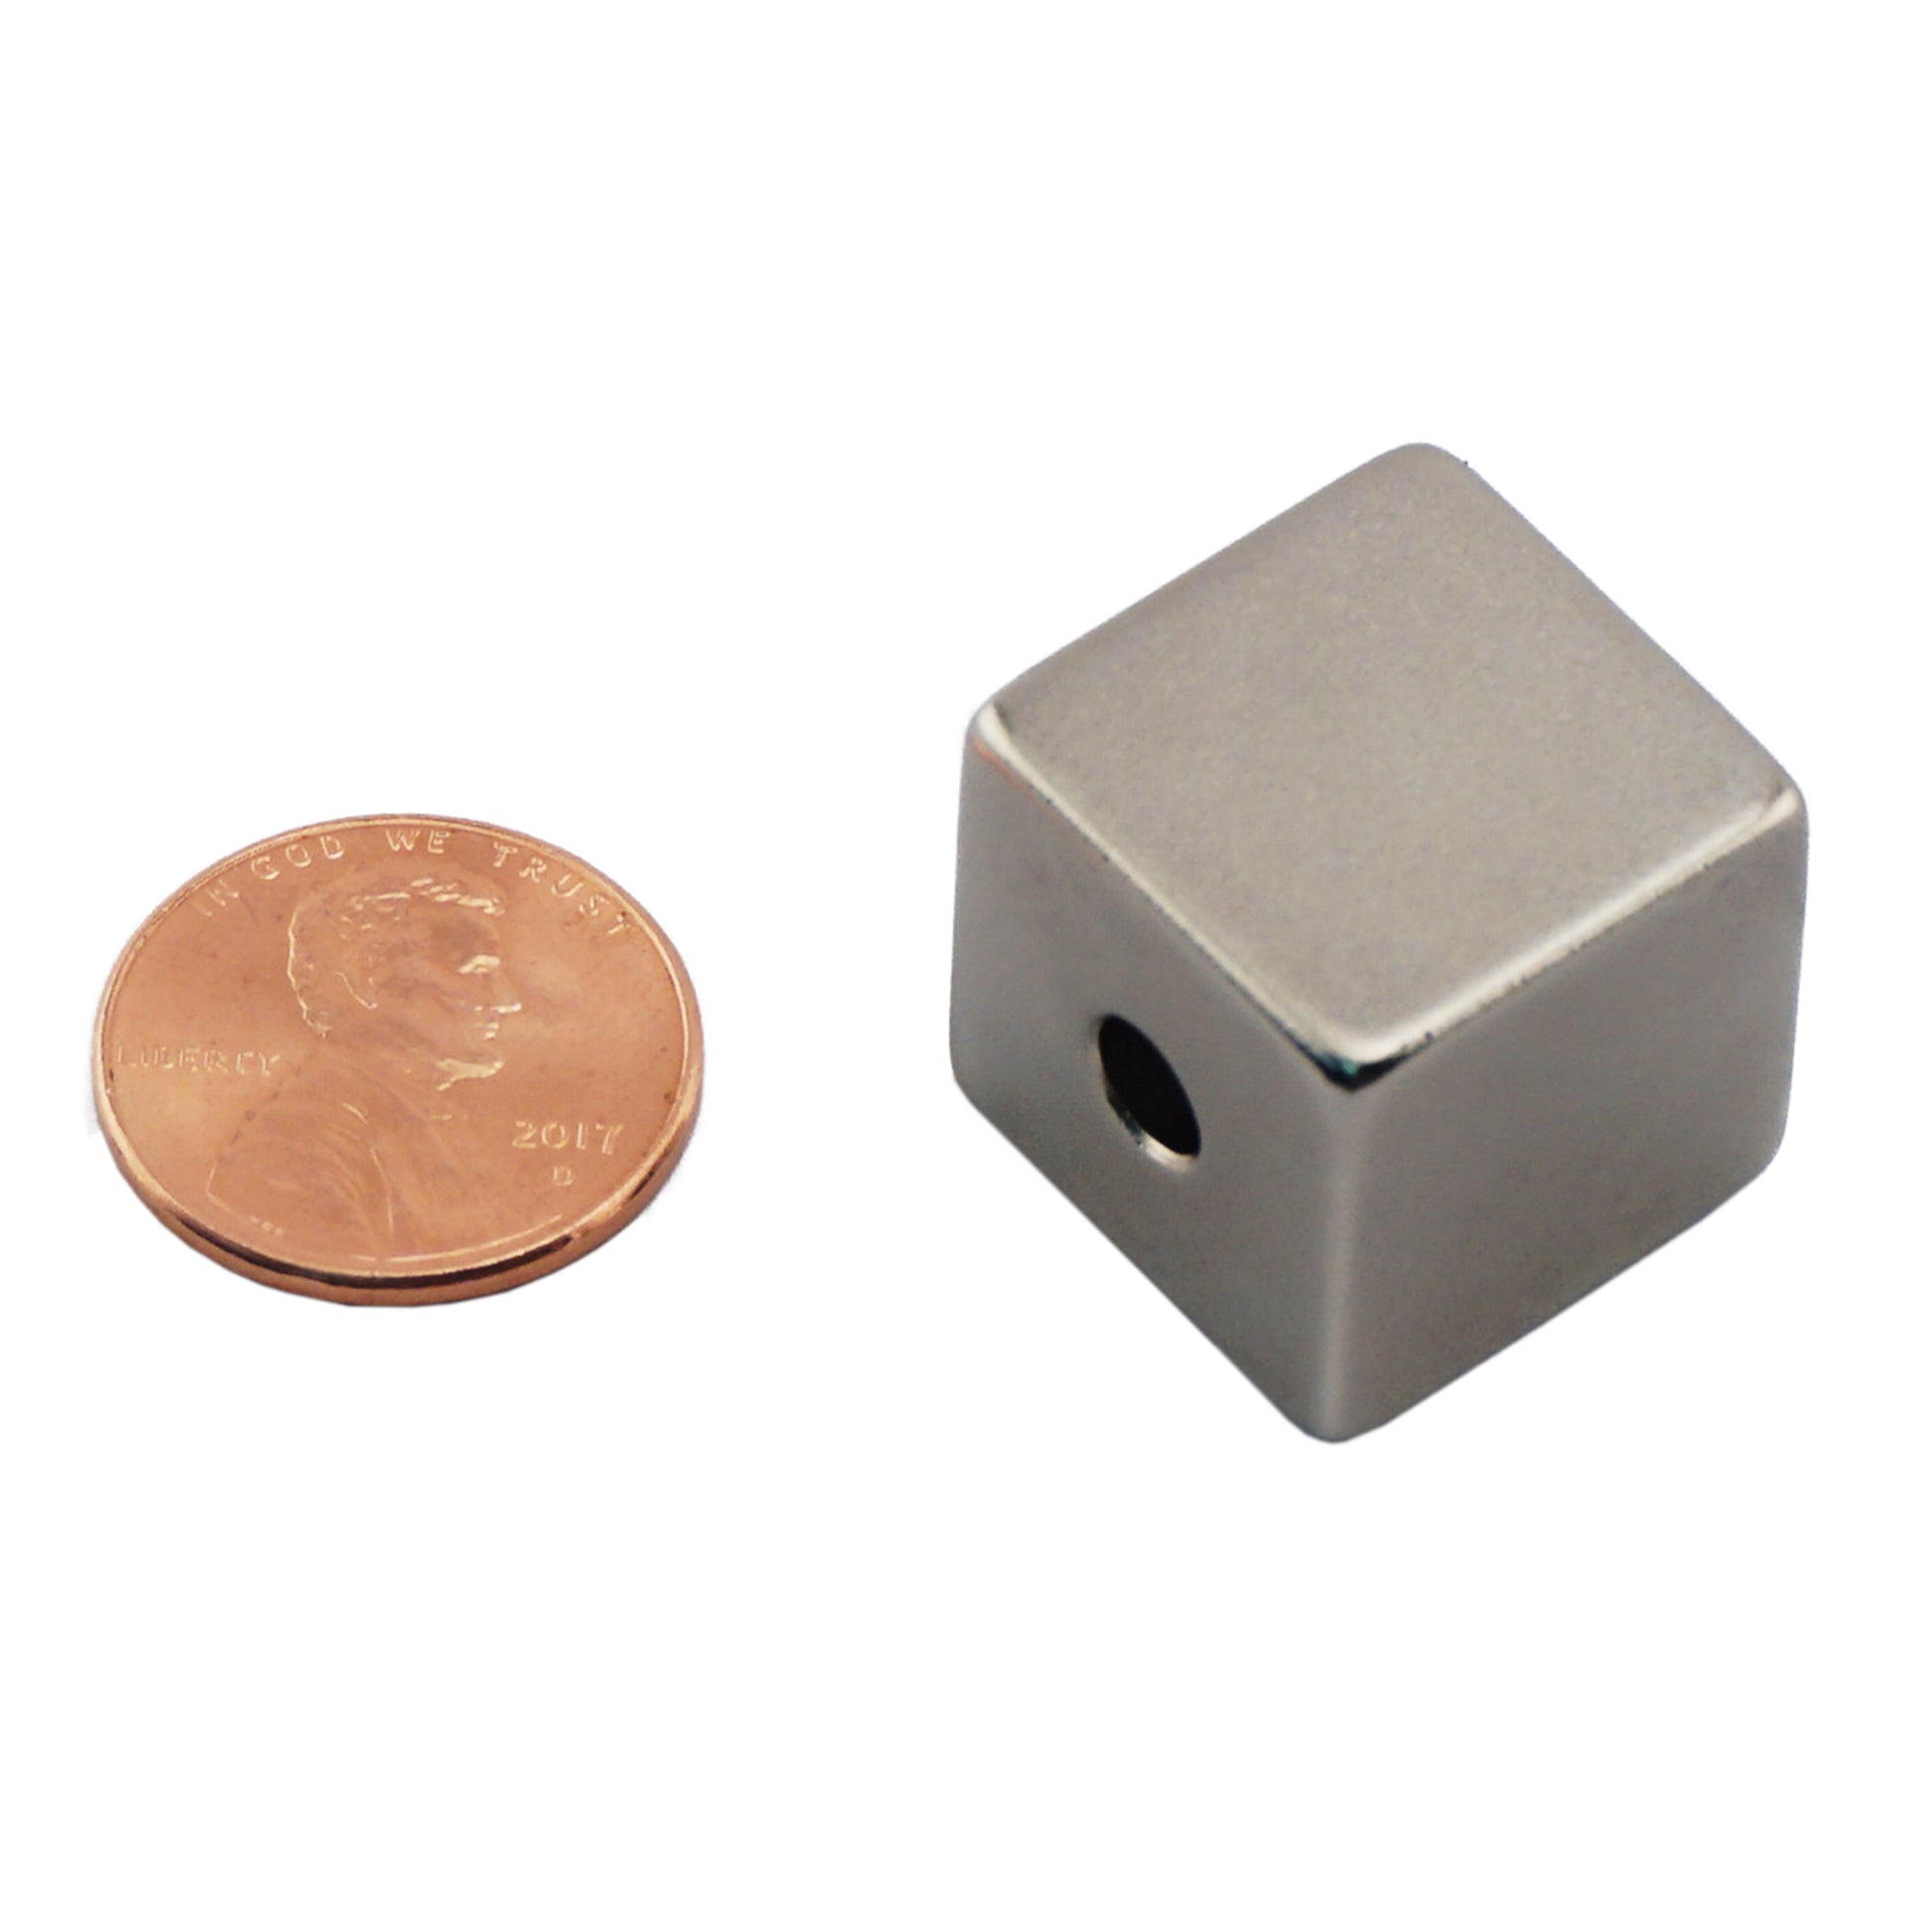 Load image into Gallery viewer, NB007502NS01 Neodymium Block Magnet with hole - Compared to Penny for Size Reference